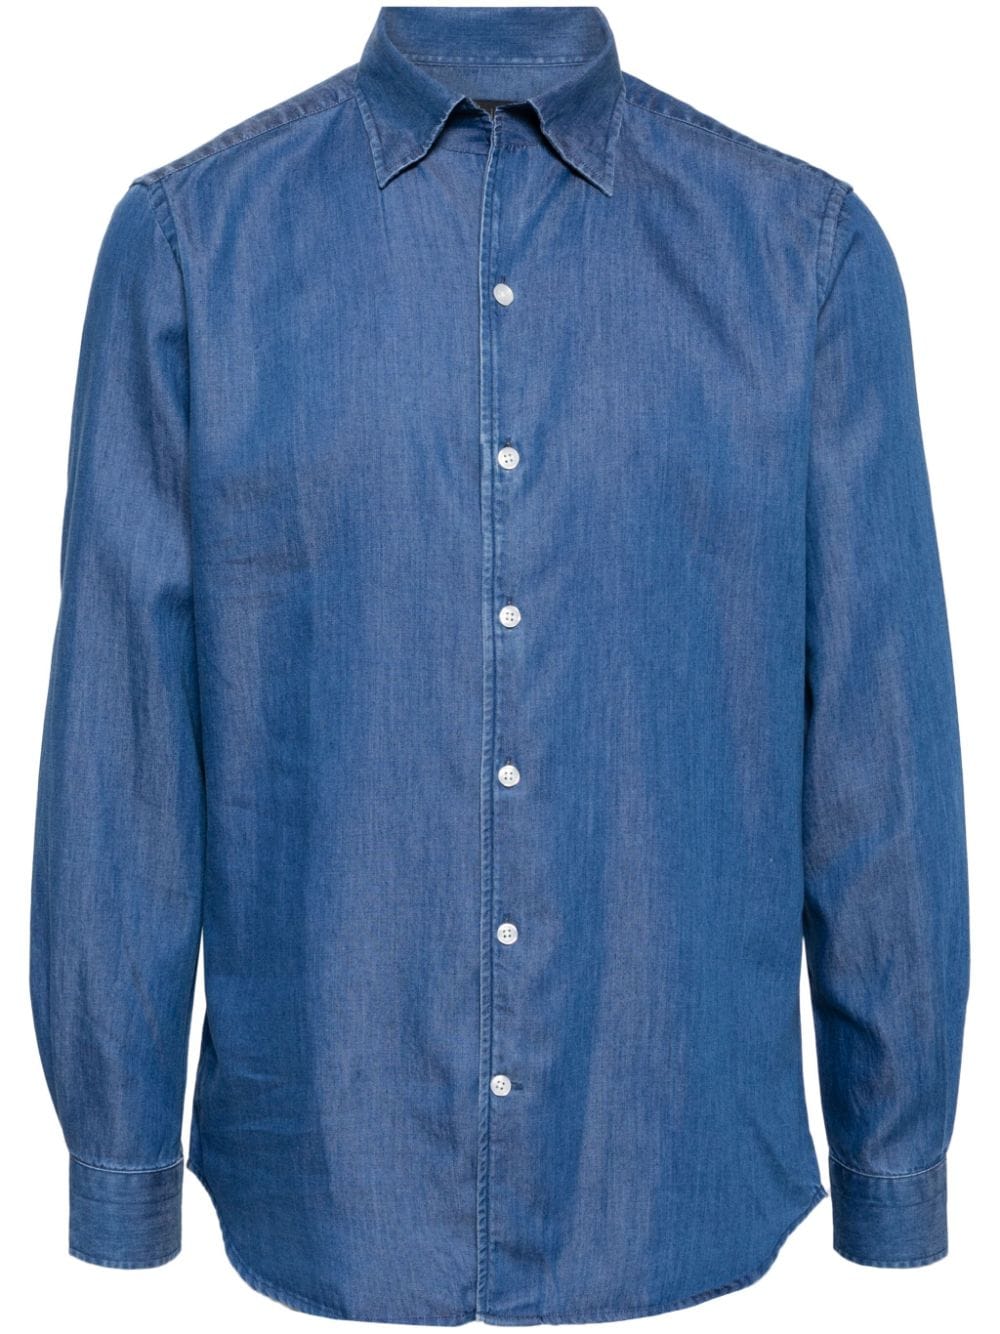 Man On The Boon. Buttoned Denim Shirt In Blue